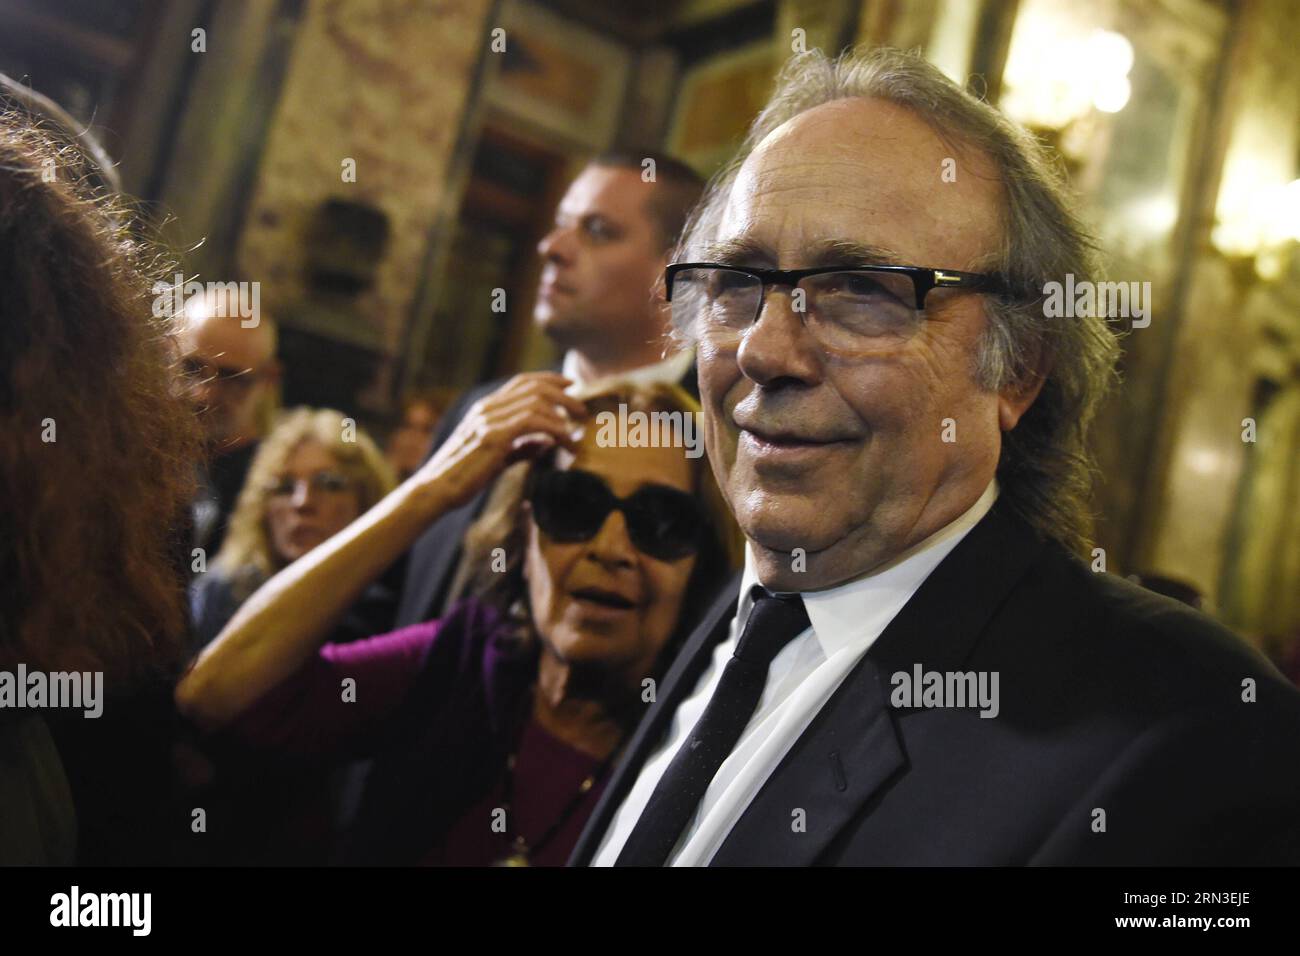 MONTEVIDEO, April 14, 2015 -- The widow of Uruguayan writer Eduardo Galeano, Helena Villagra (L) and the Spanish singer Joan Manuel Serrat, react during the tribute to Eduardo Galeano organized by the government of Uruguay, in the Hall of Lost Steps of the Legislative Palace, in Montevideo, capital of Uruguay, on April 14, 2015. According to local press, Eduardo Galeano, author of The Open Veins of Latin America (1971), died on Monday in Montevideo at the age of 74 years as a result of lung cancer. Galeano s body will be cremated on Wednesday. Nicolas Celaya) (bxq) URUGUAY-MONTEVIDEO-CULTURE-E Stock Photo